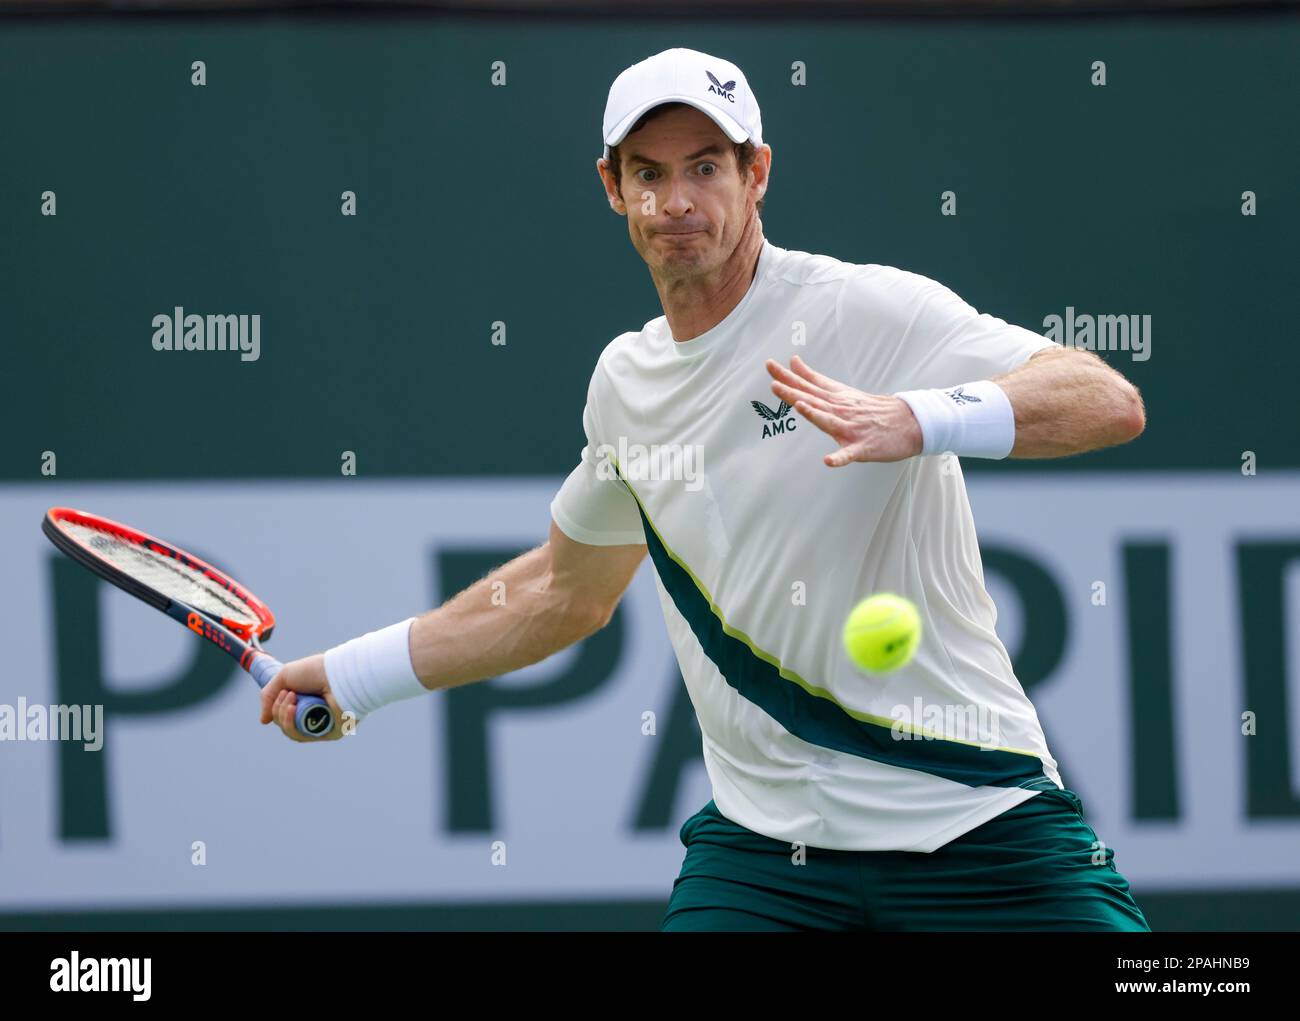 March 11, 2023 Andy Murray of Great Britain returns a shot against Radu Albot of Moldova during the 2023 BNP Paribas Open at Indian Wells Tennis Garden in Indian Wells, California